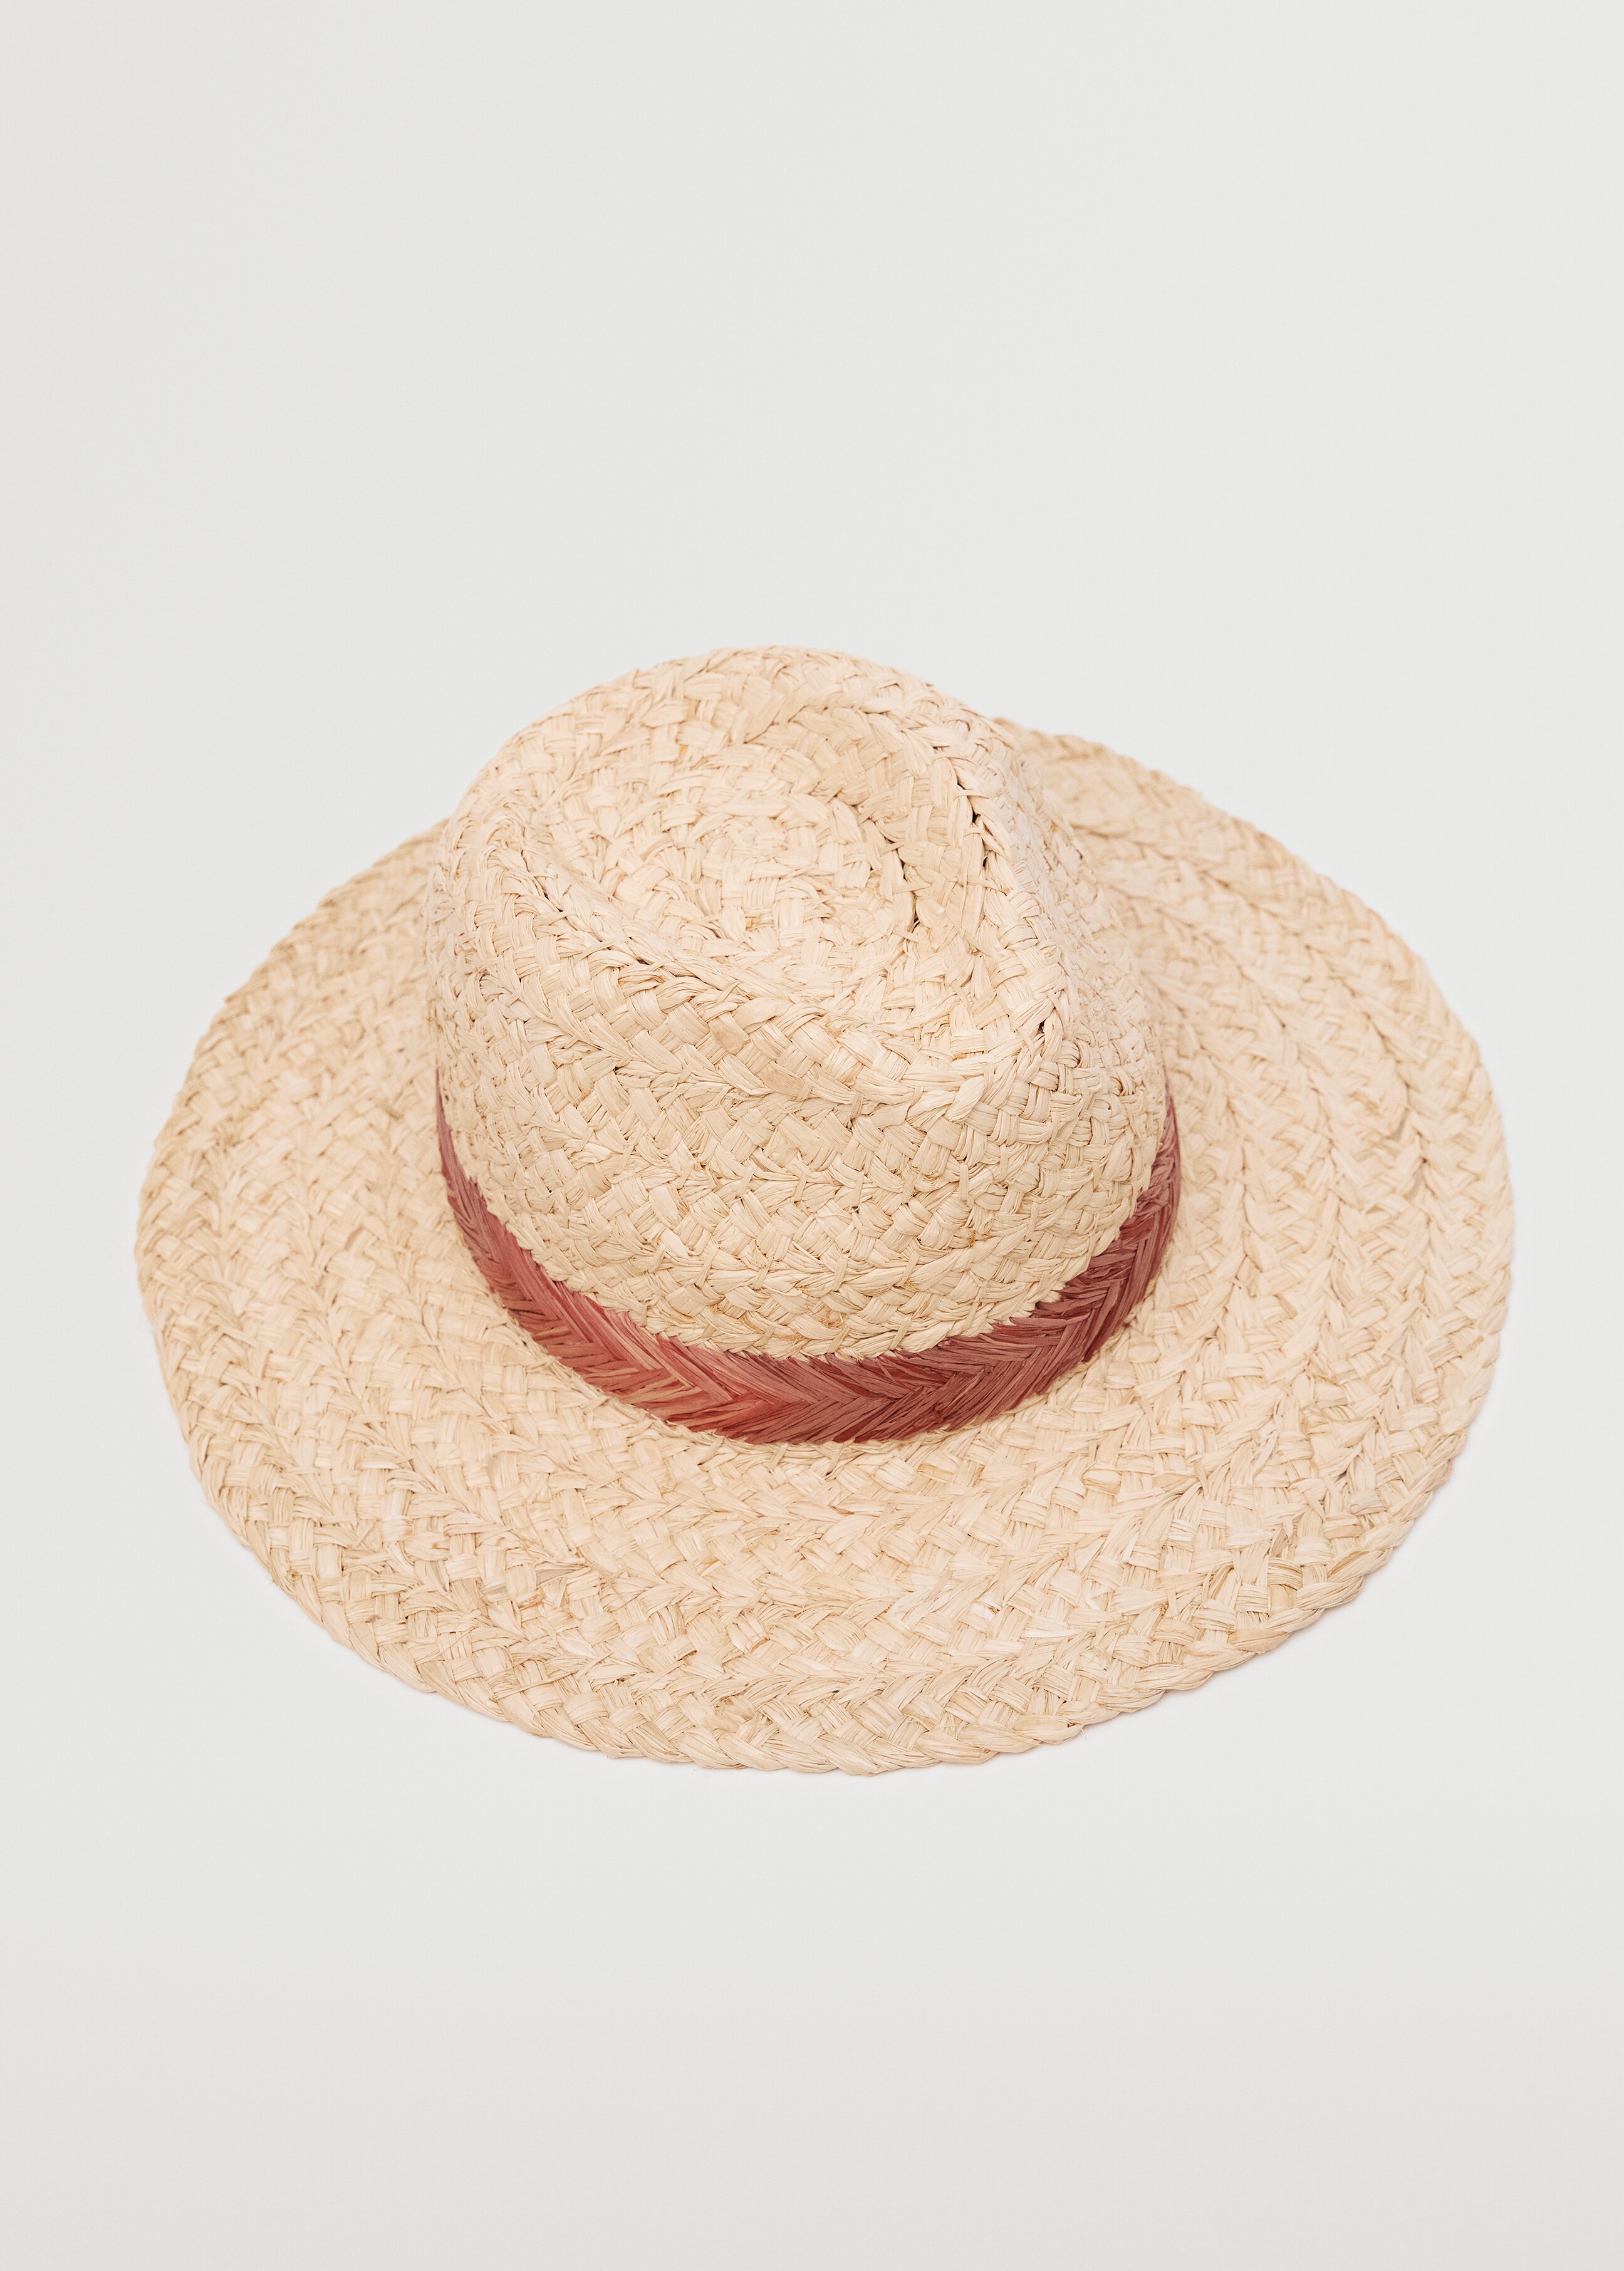 Braided straw hat - Details of the article 2